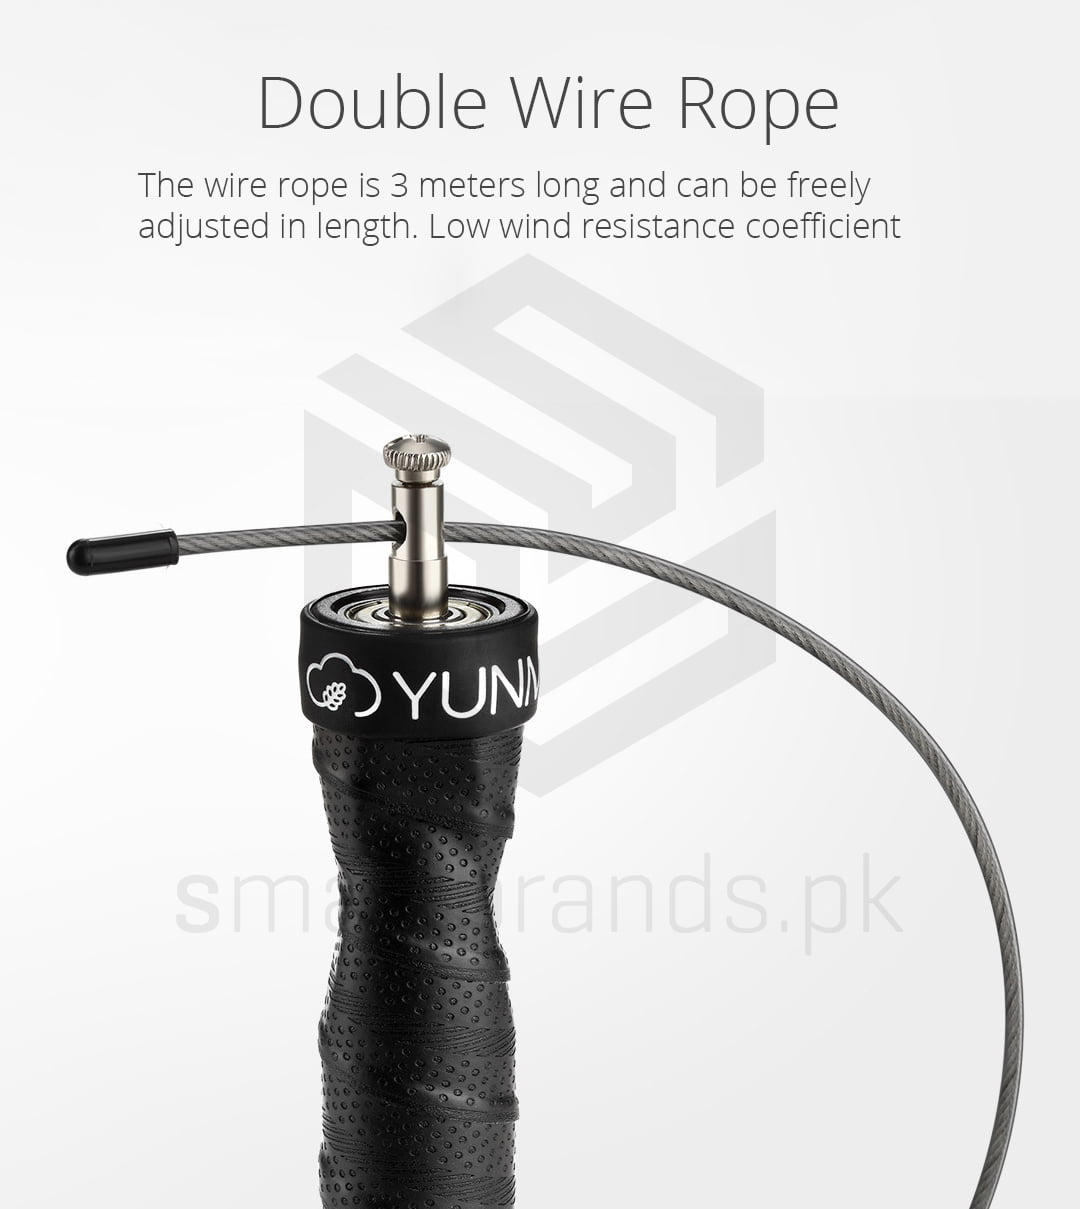 double wire rope. The wire rope is 3 meters long and can be freely adjusted in length. Low wind resistance coefficient